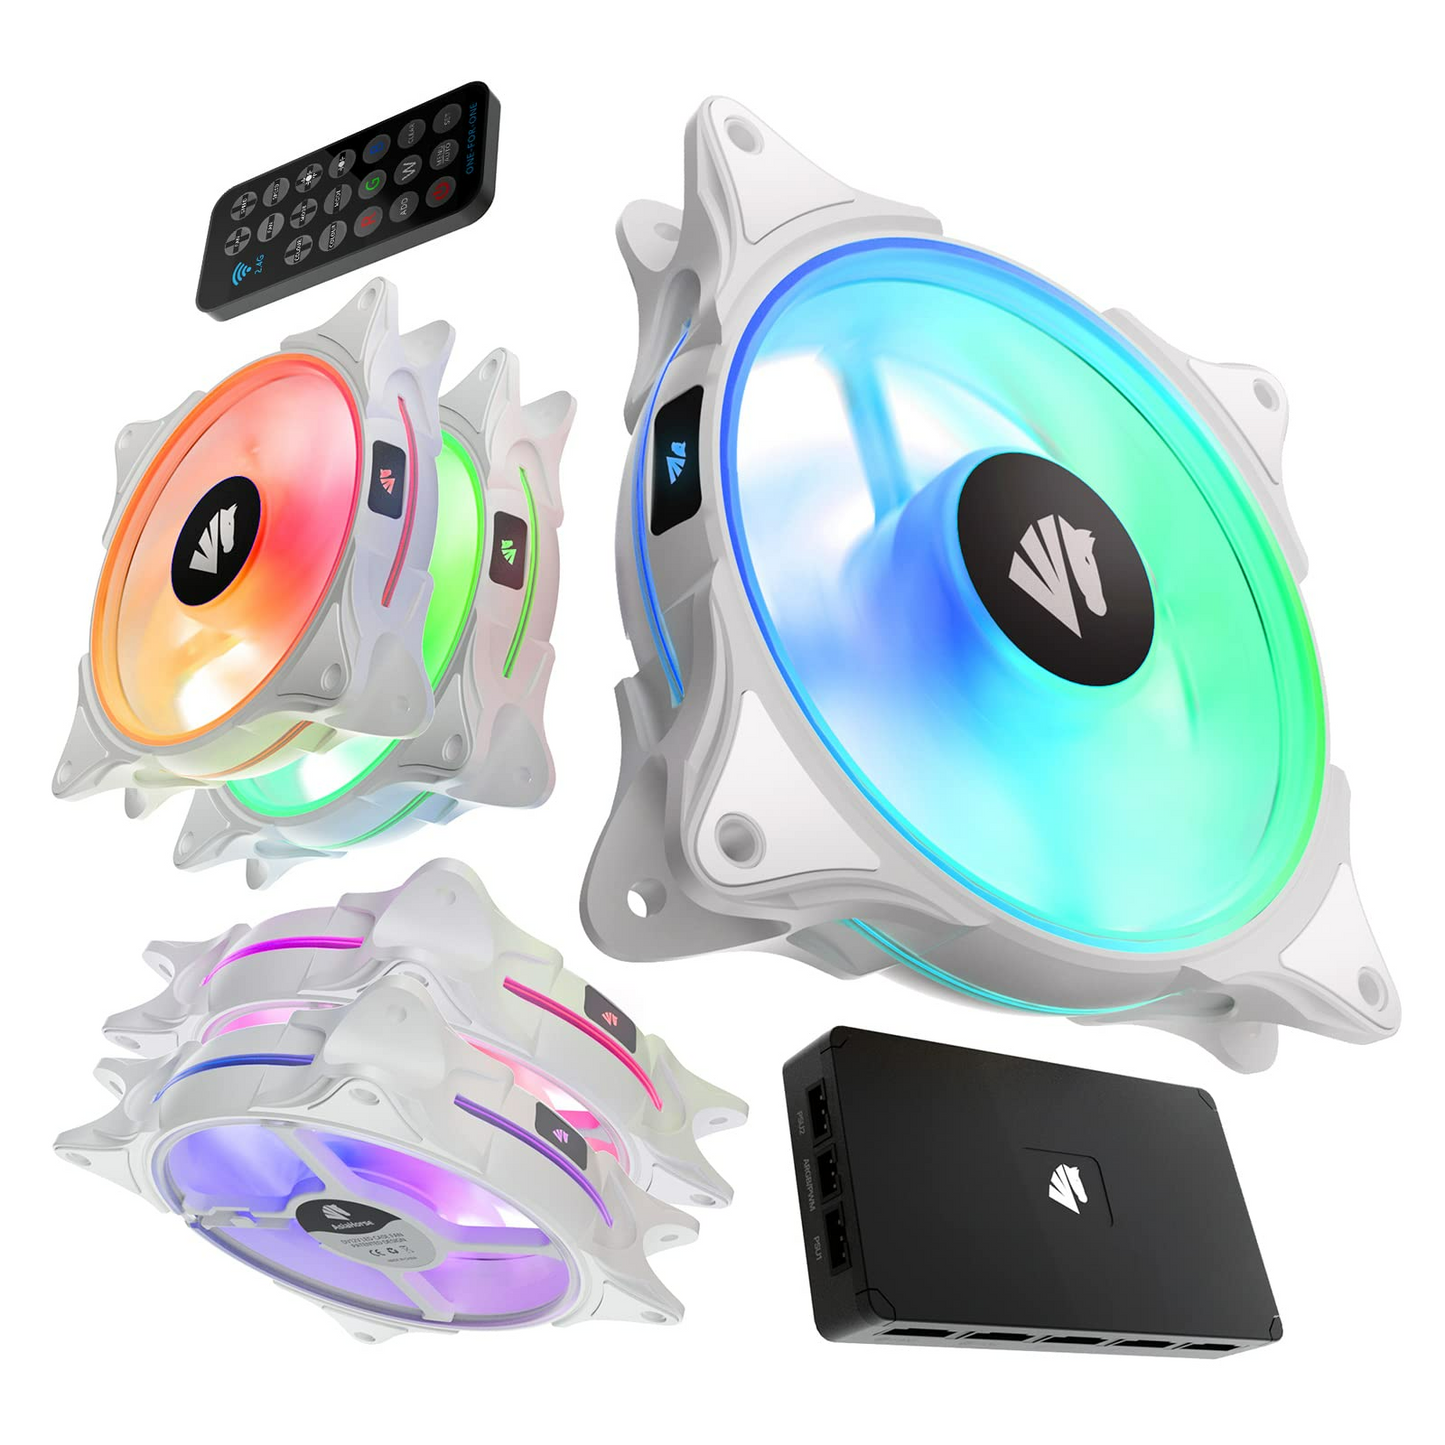 AsiaHorse FS9002 Pro 120mm PWM PC Case Fan, Adjustable Speed of 800-1800rpm, Double LED Lingting Loops, 5V 3-pin ARGB Header Motherboard Aura SYNC with Hub and Remote - White 5pack